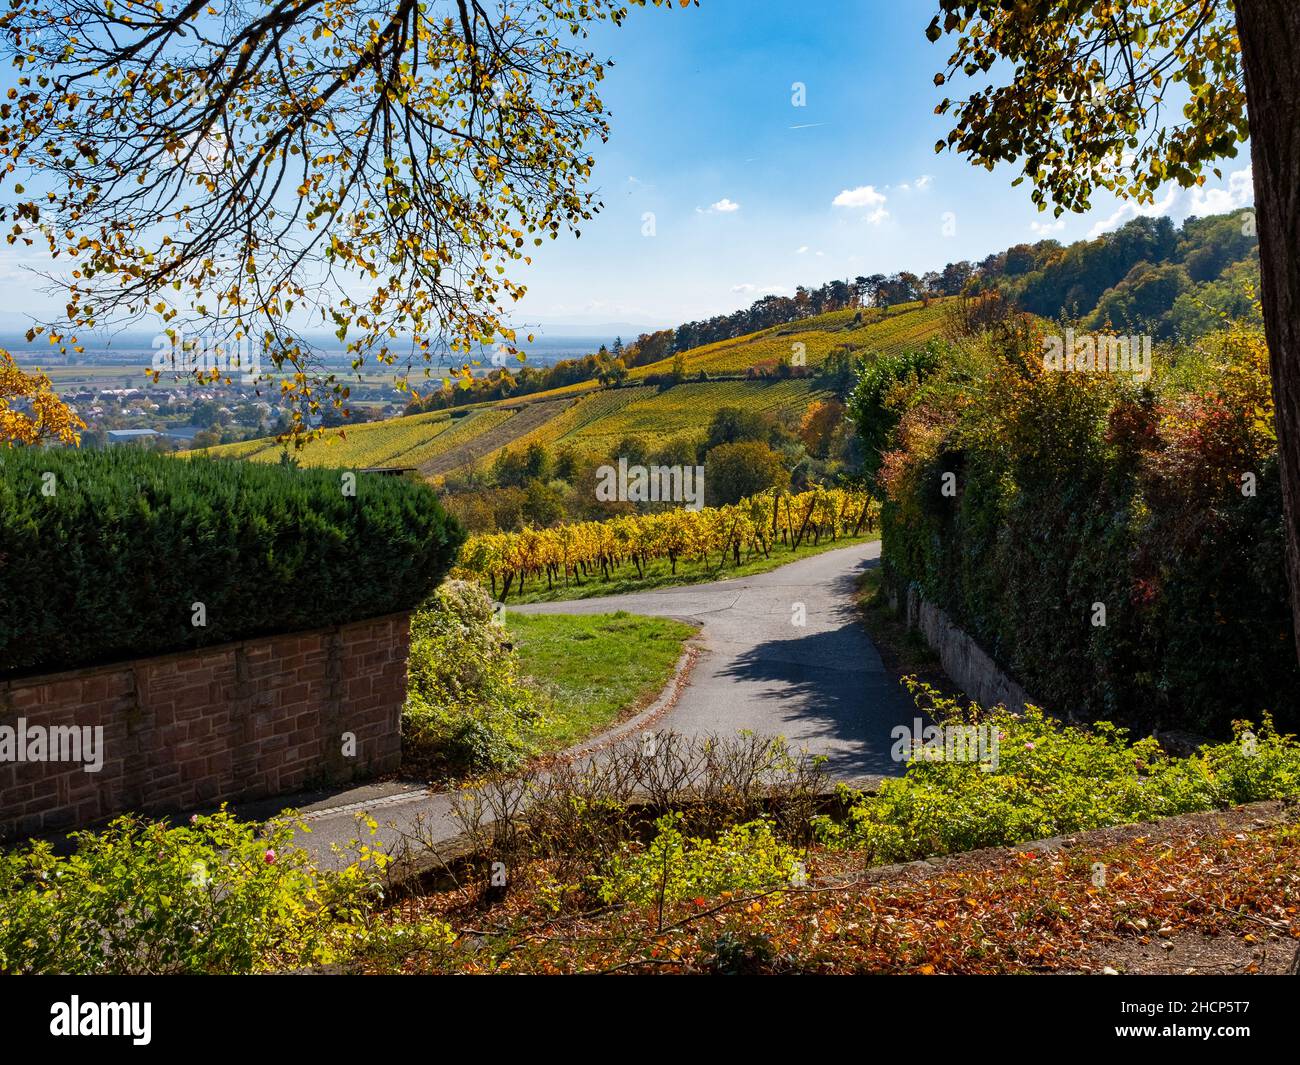 Alsatian vineyard with autumn colors near Strasbourg, France, taken on a sunny autumn day with no people Stock Photo